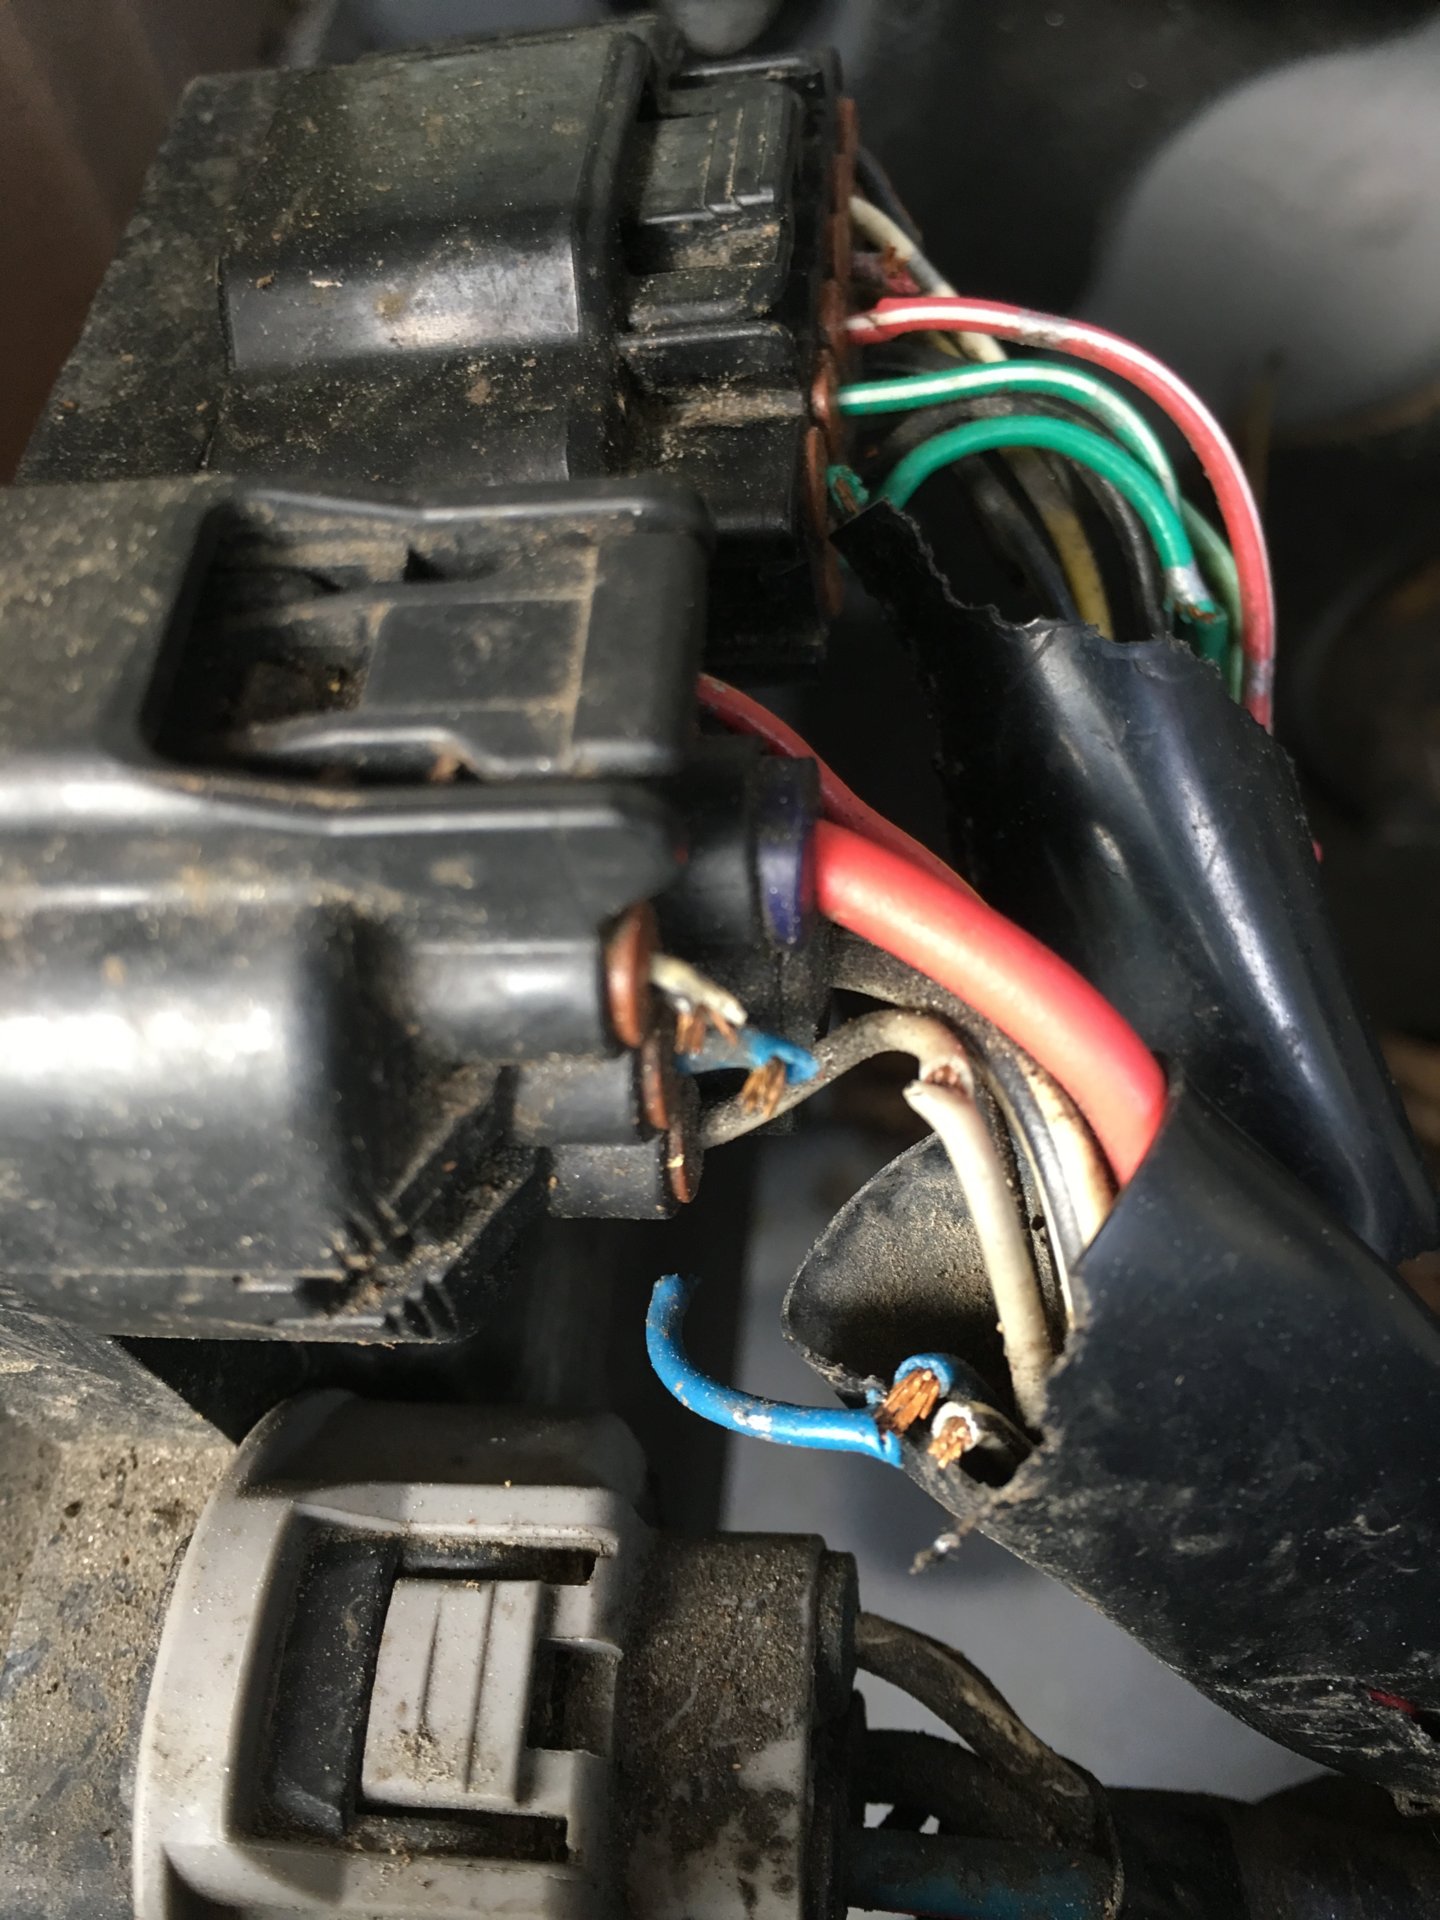 Yamaha Side-By-Side Electrical Issues